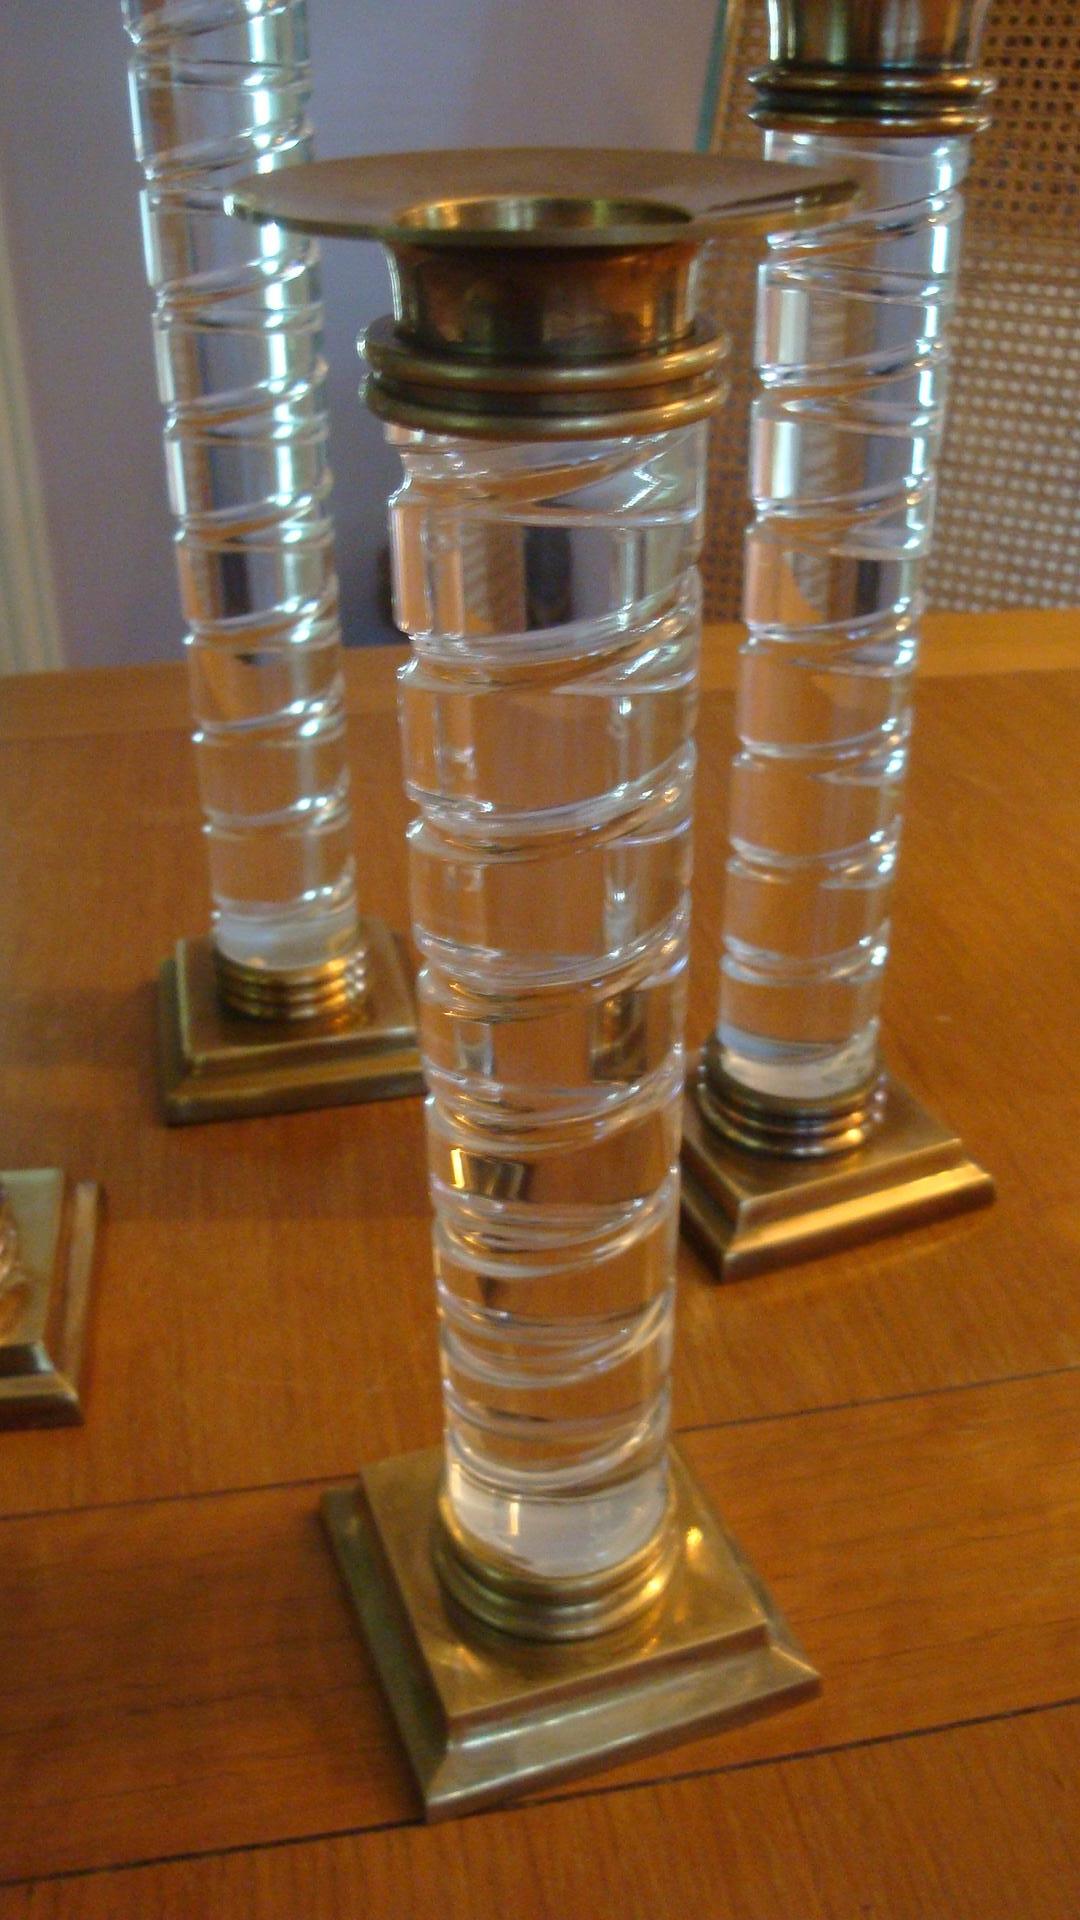 This is a set of four Dolbi Cashier Lucite and brass candlesticks from 1987. The set is in excellent condition and range from 9-13 inches in height.